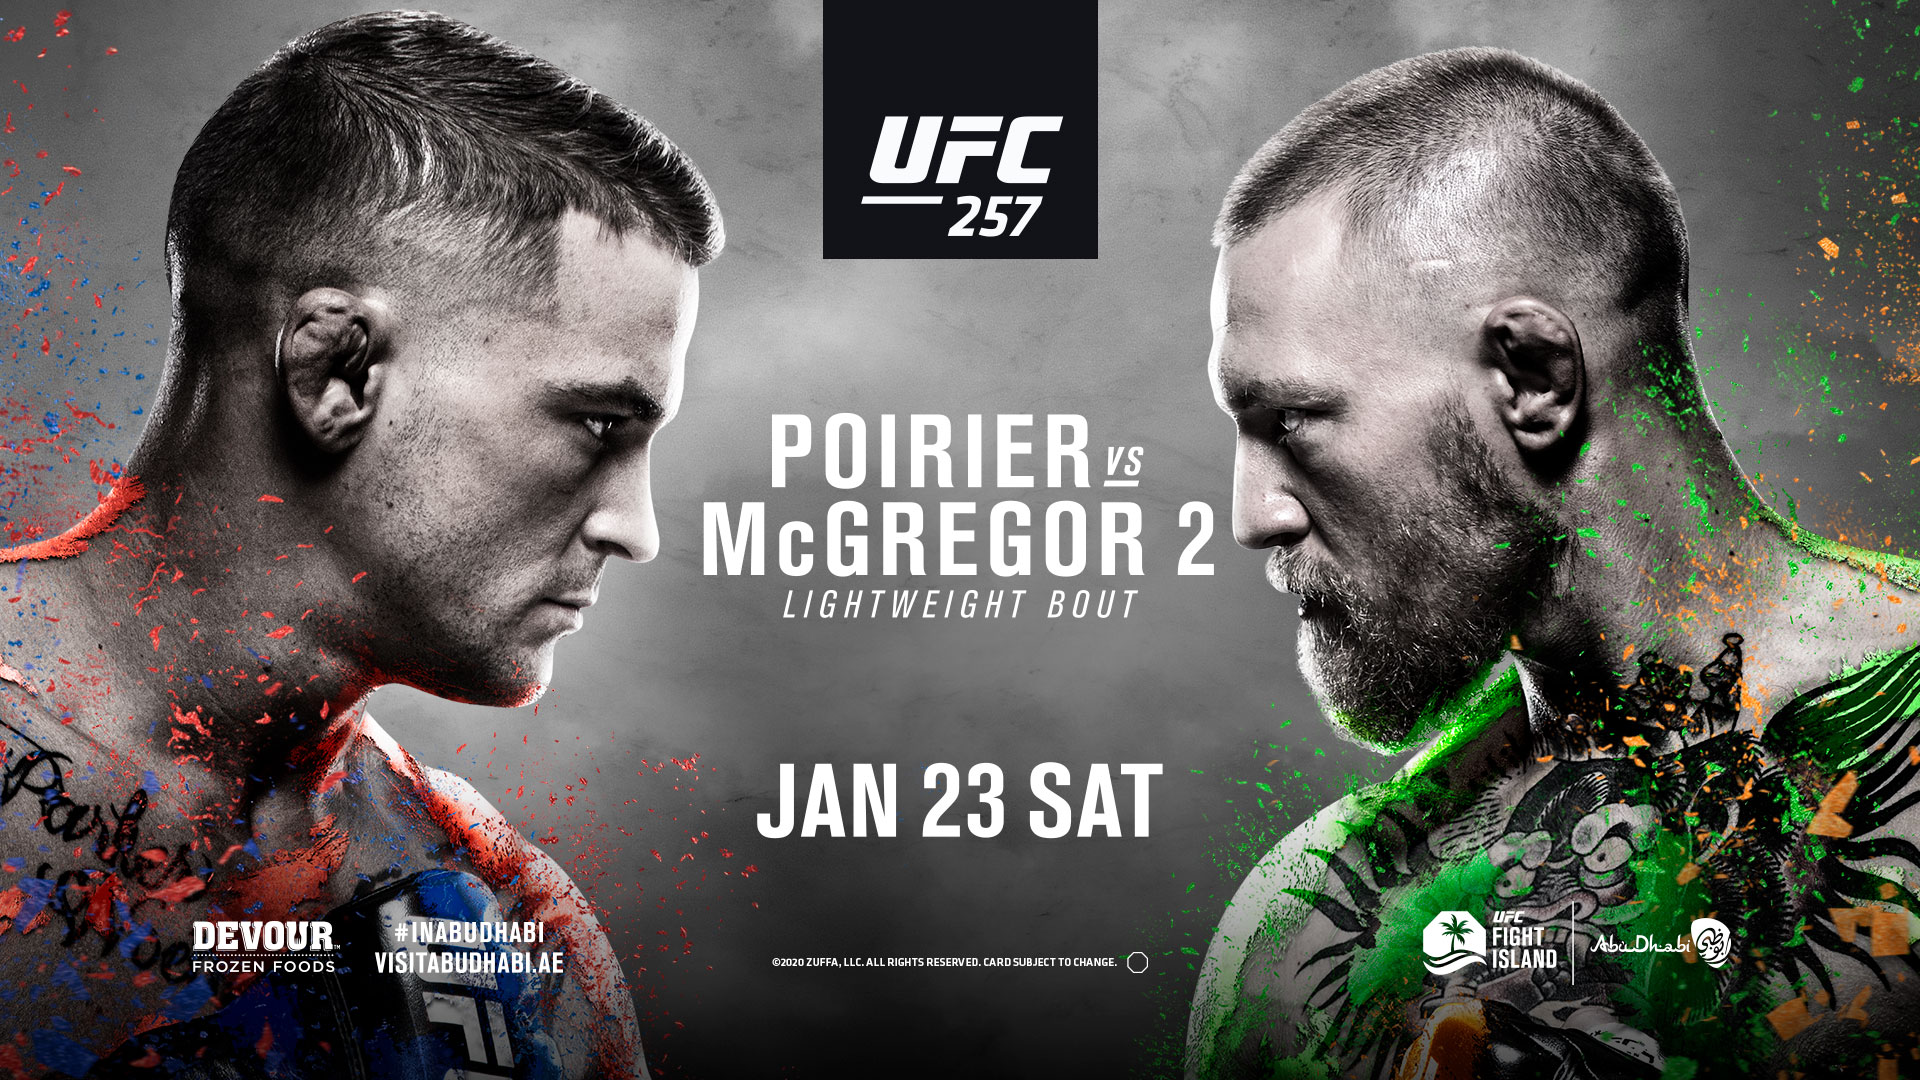 UFC 257 McGregor vs Poirier 2 Live stream, TV channel, PPV price and start time